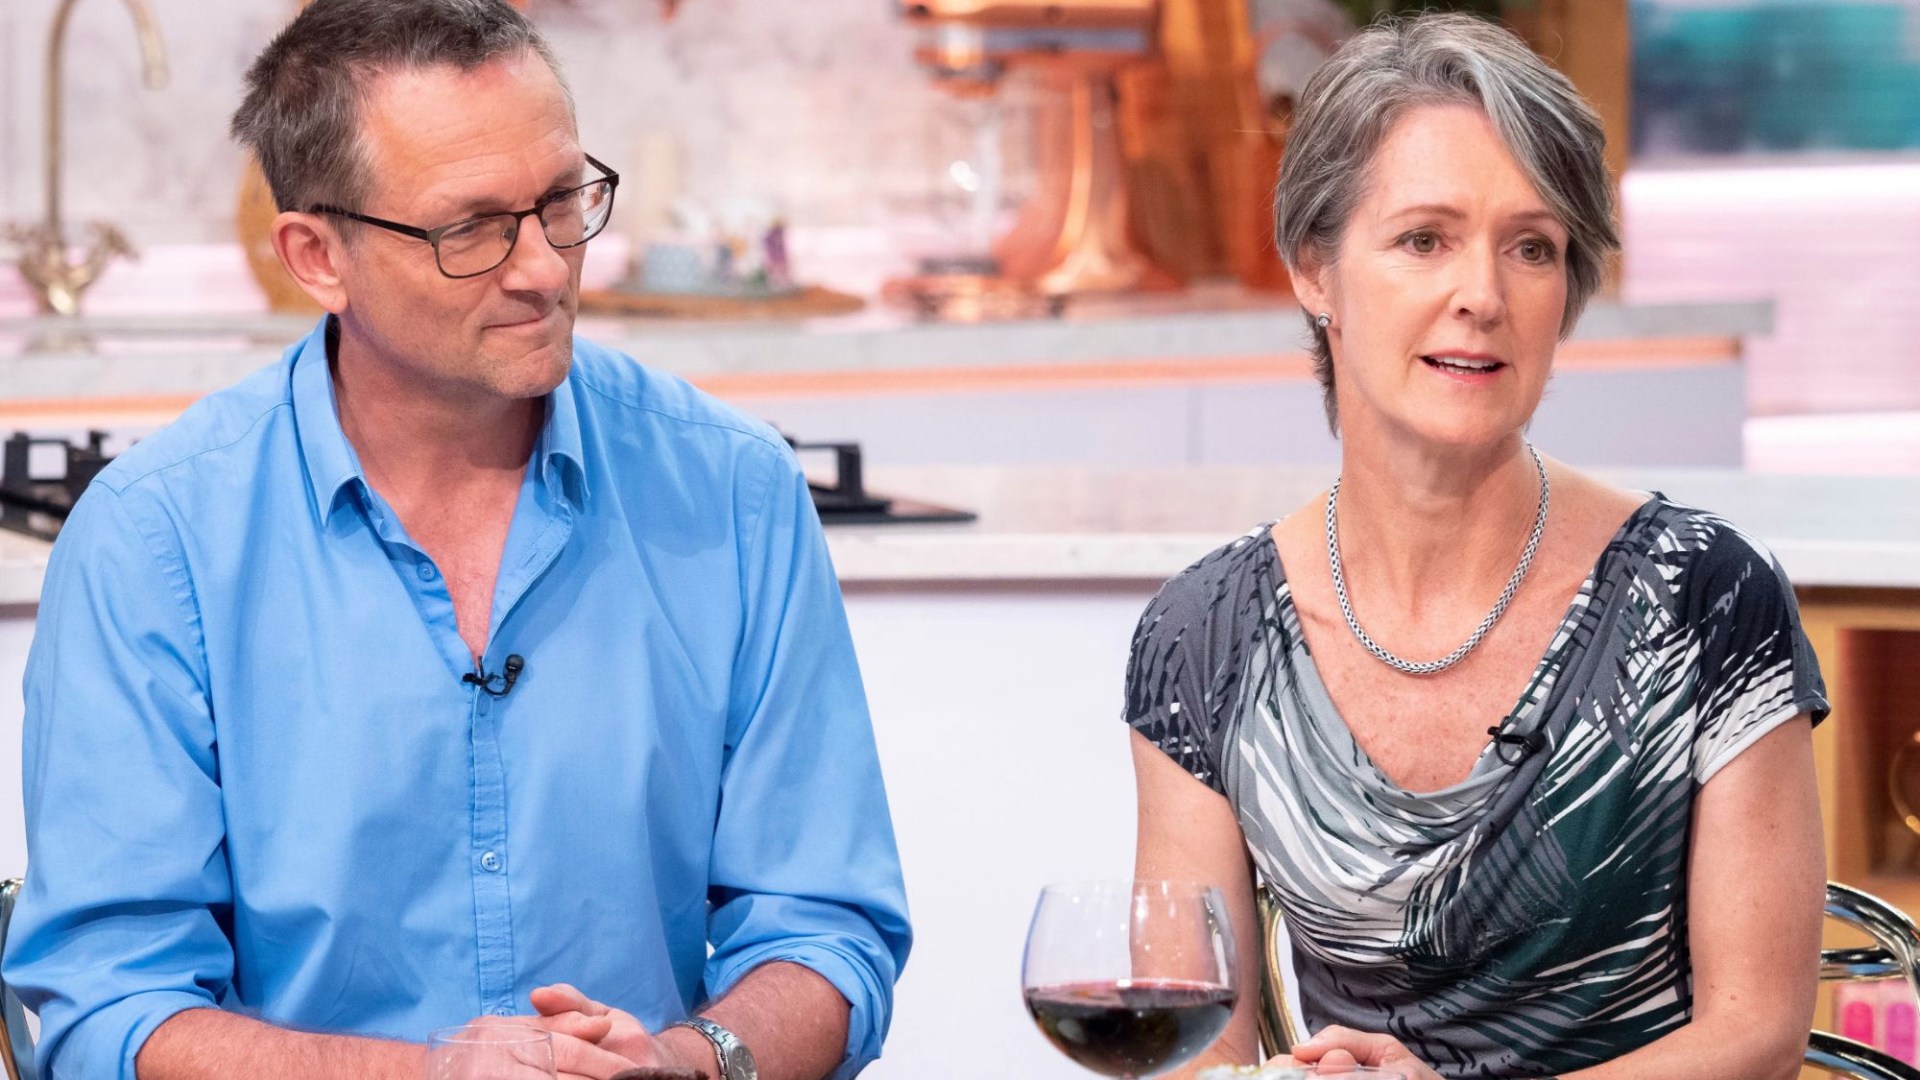 Inside Dr Michael Mosley’s 44-year love story with university sweetheart wife Clare who ‘taught him to eat greens’ [Video]